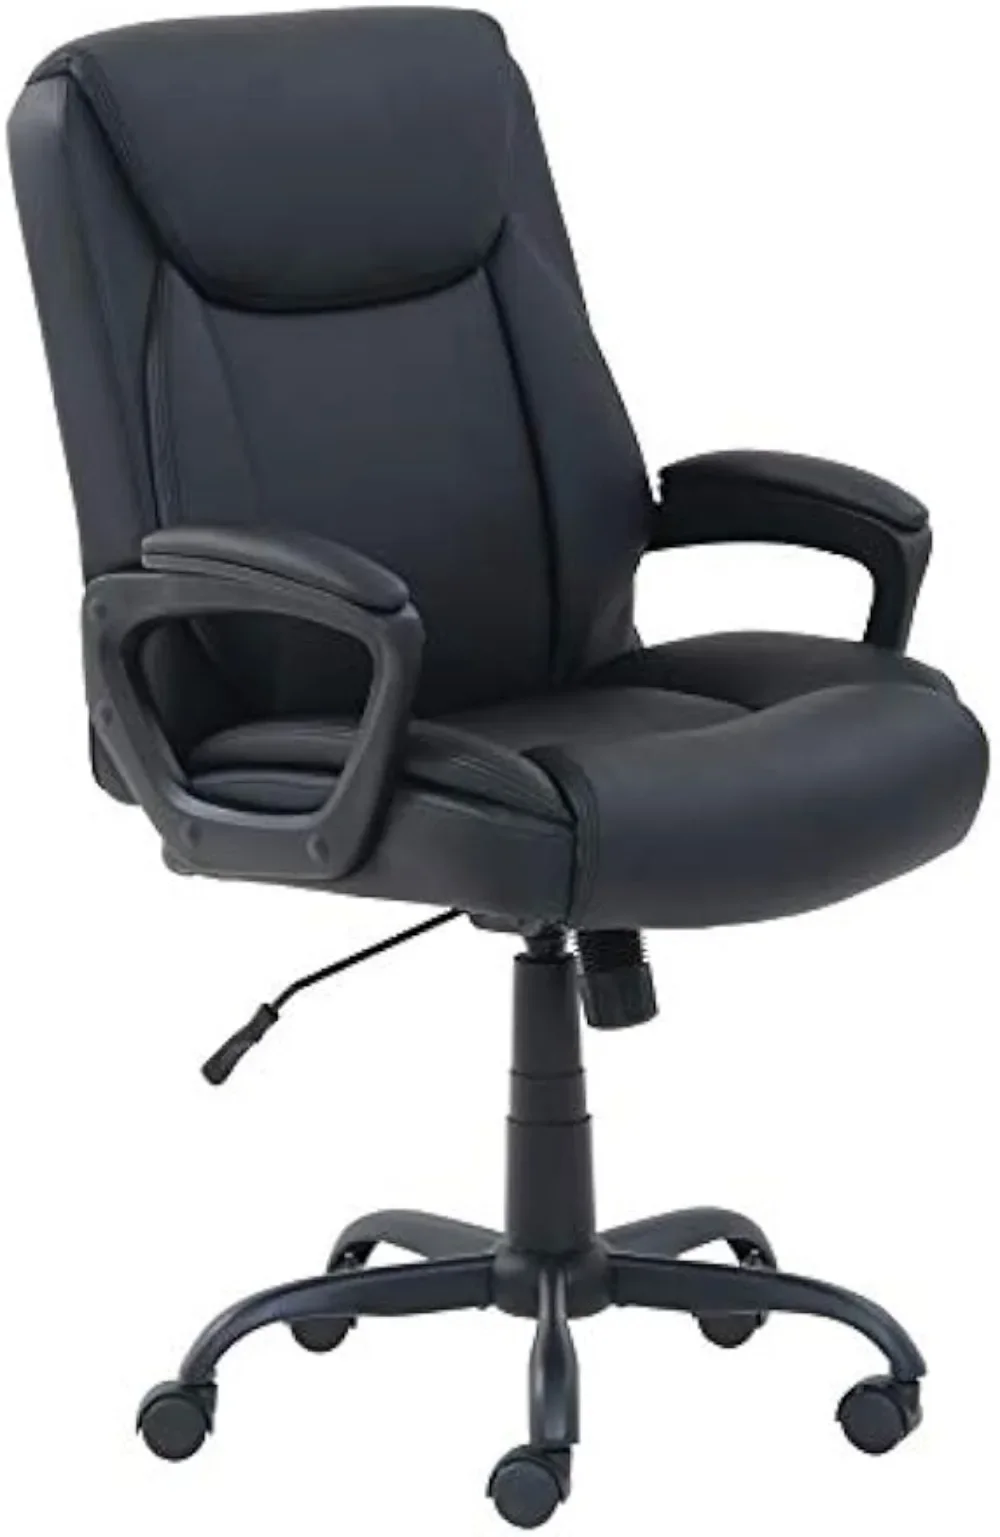 

Classic Puresoft PU Padded Mid-Back Office Computer Desk Chair with Armrest, 26"D x 23.75"W x 42"H, Black